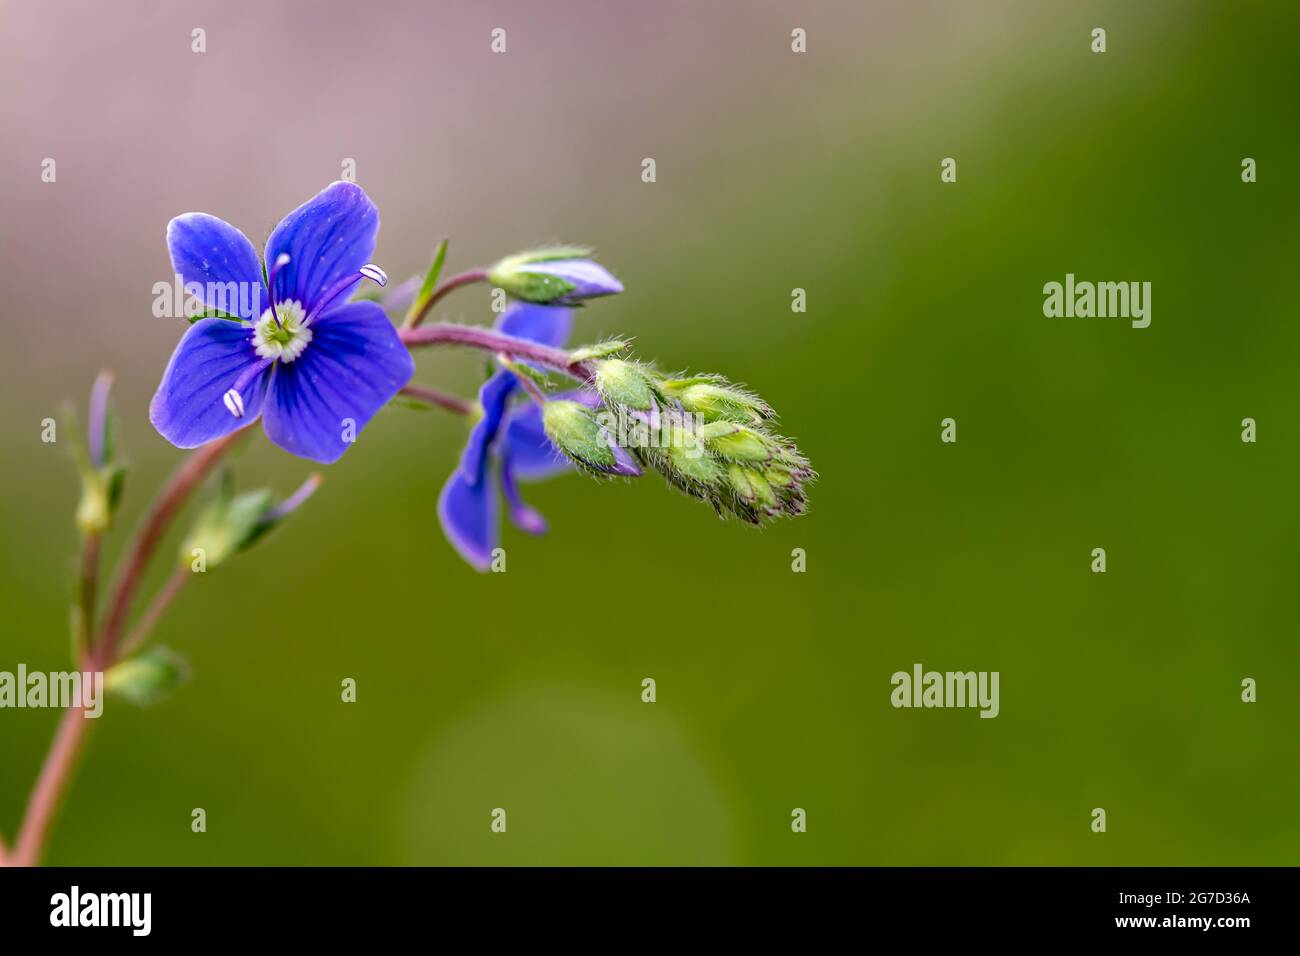 Veronica agrestis flowers in the garden, close up Stock Photo